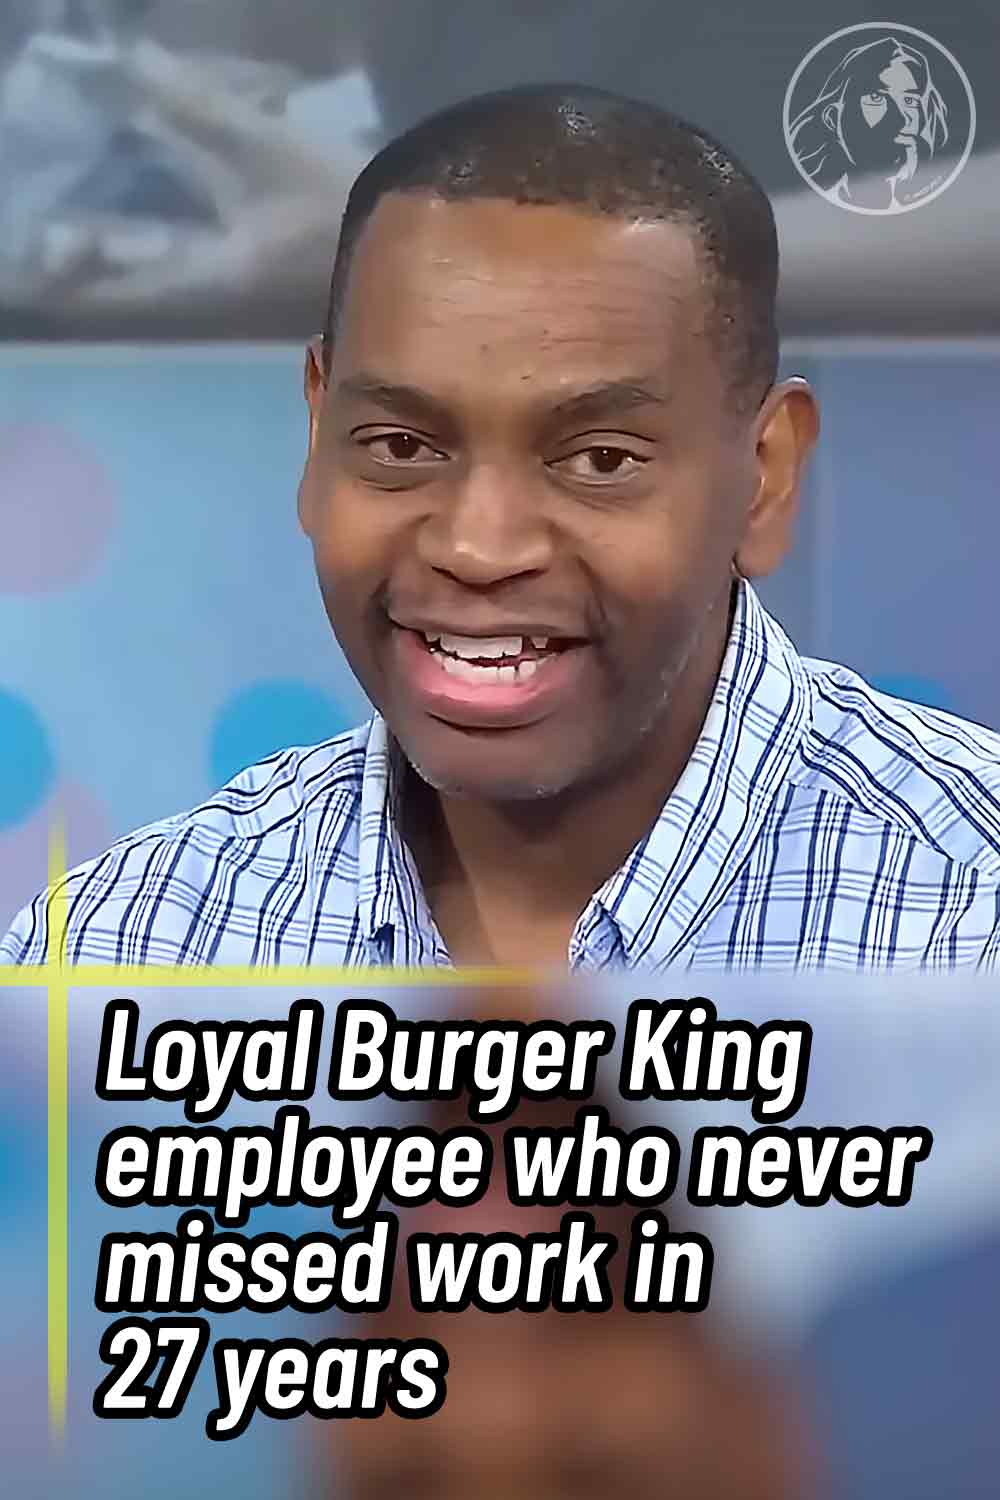 Loyal Burger King employee who never missed work in 27 years